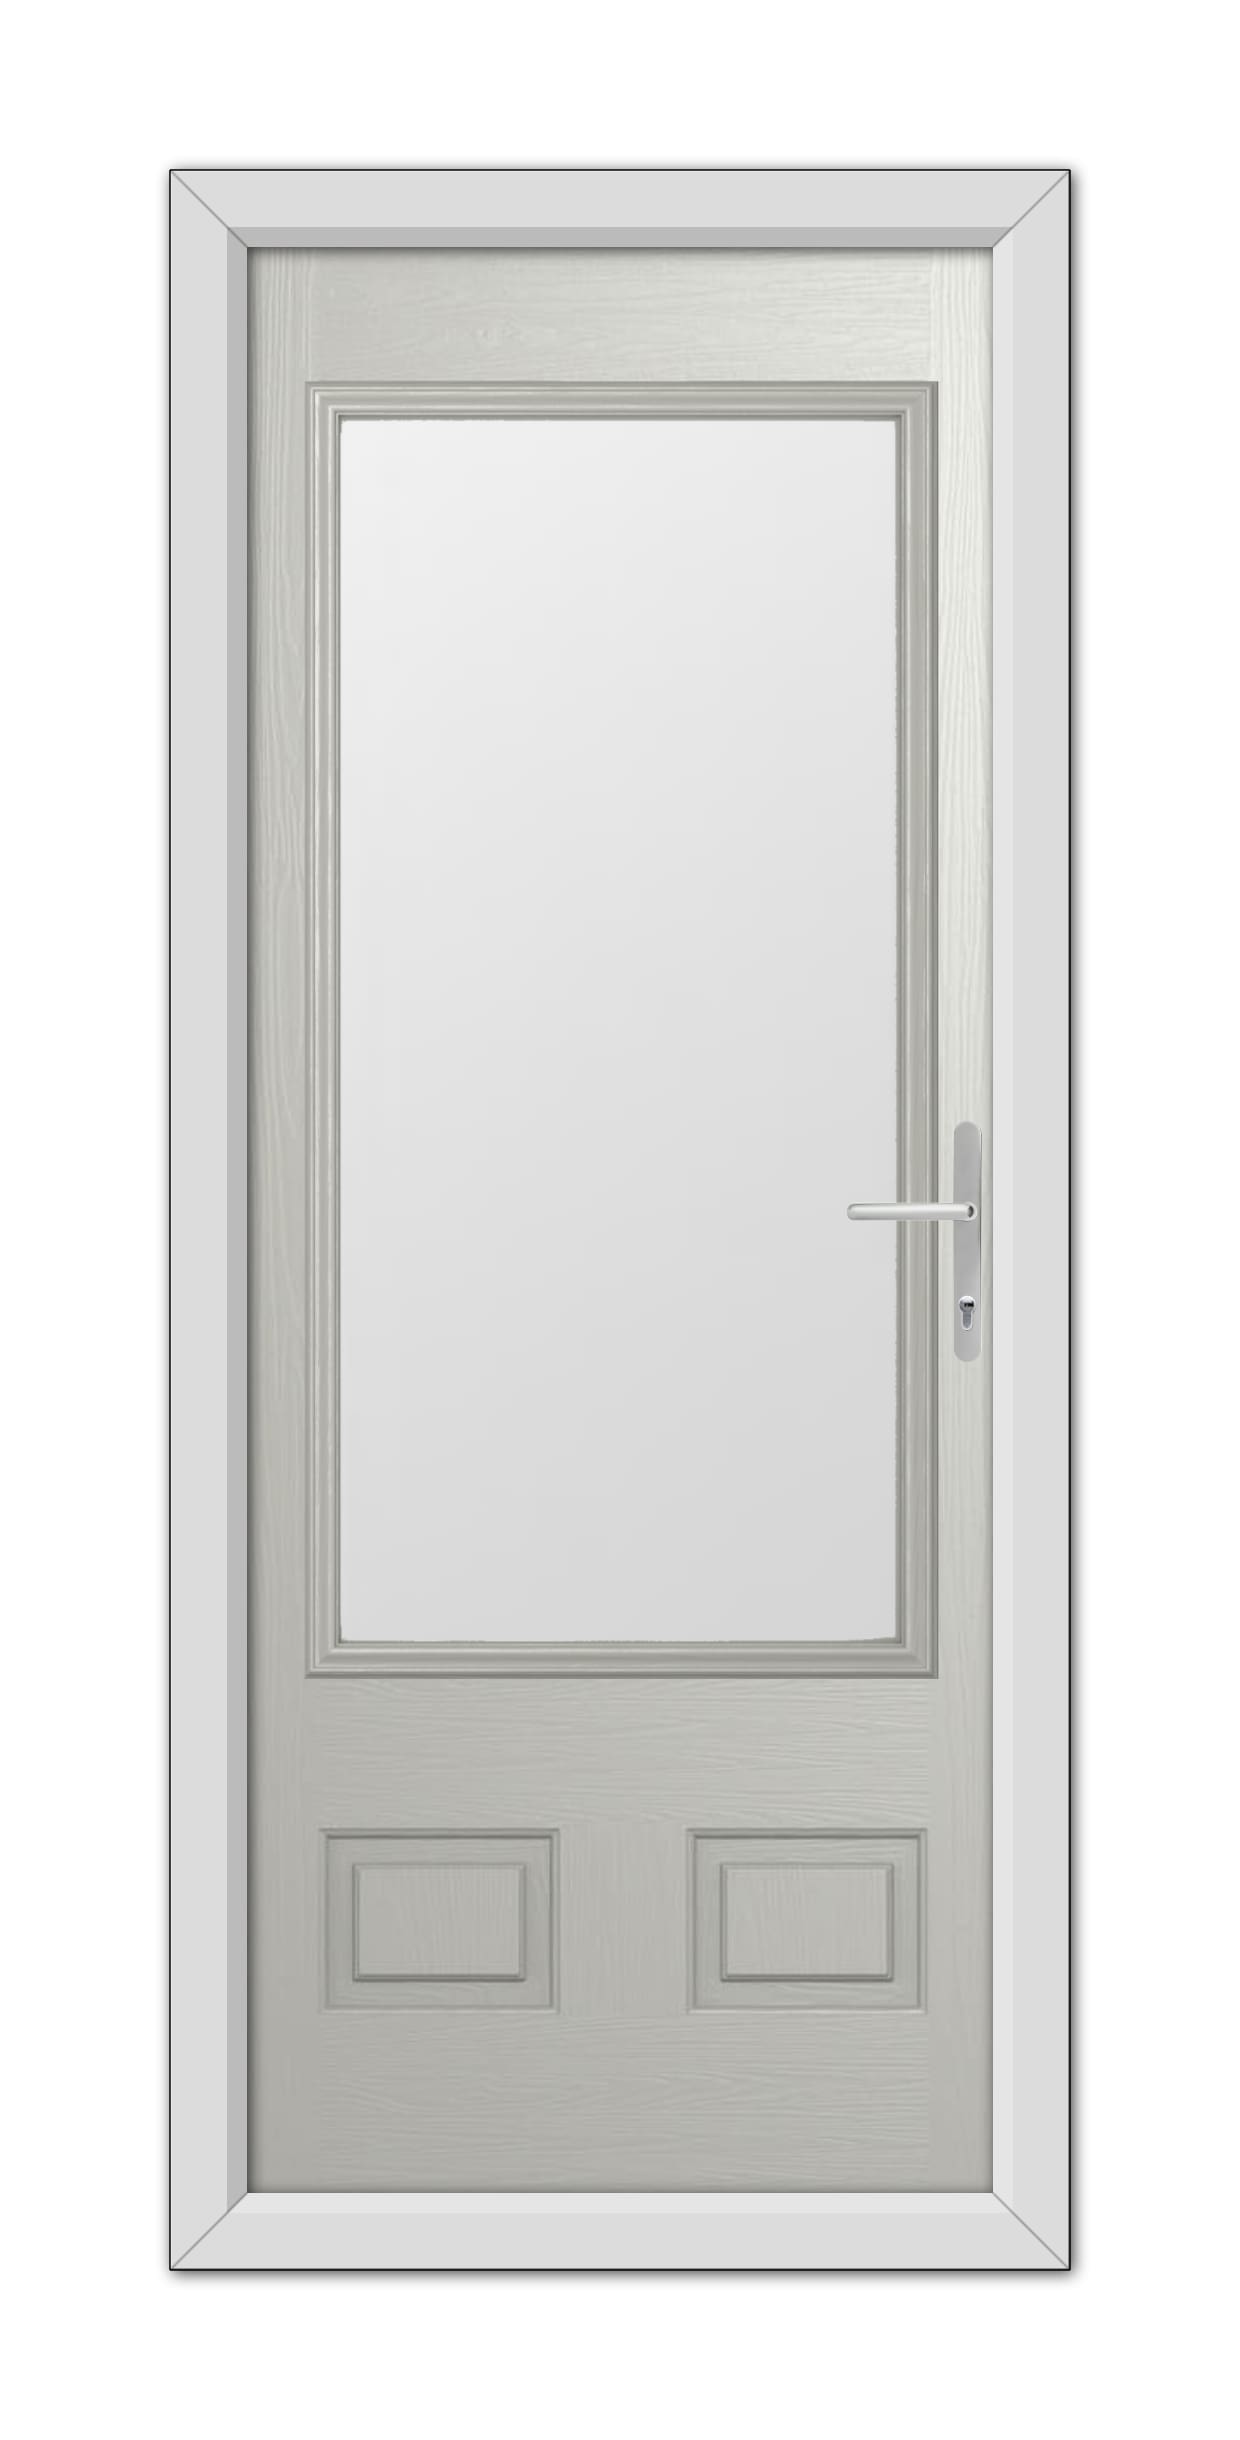 Agate Grey Walcot Composite Door 48mm Timber Core framed by a simple architectural casing, featuring a modern handle, and three vertical panels.